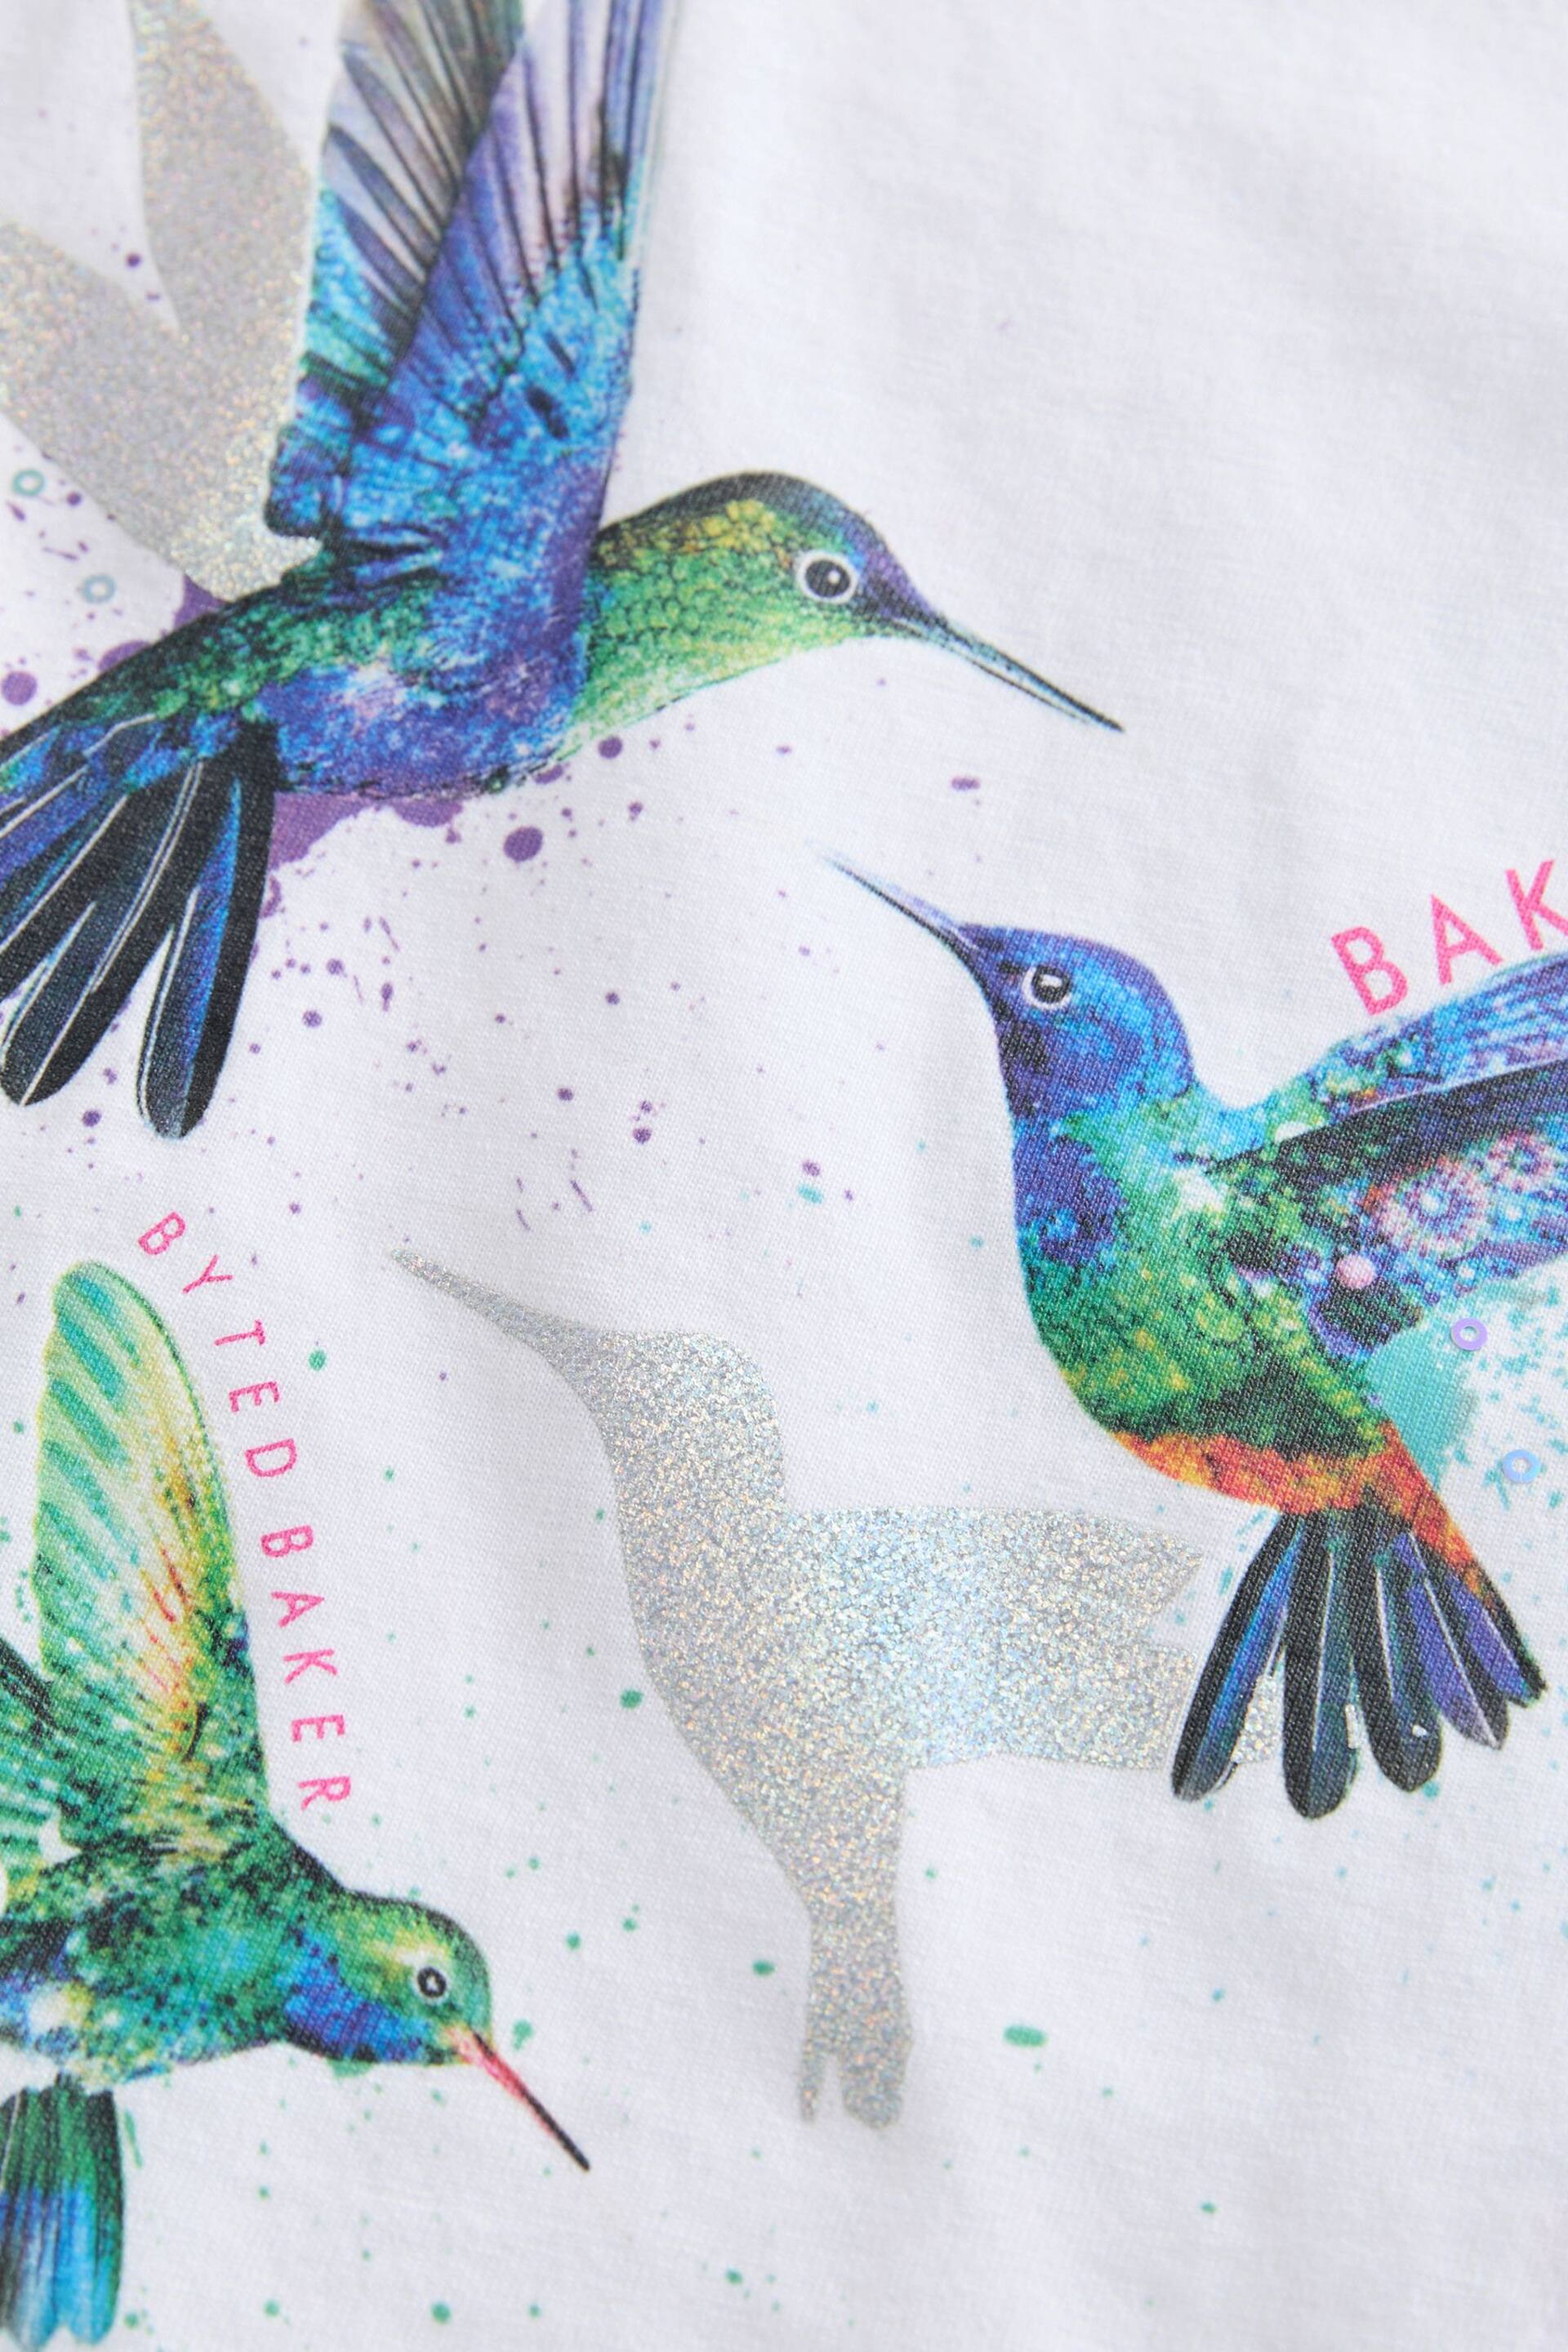 Baker by Ted Baker Graphic White T-Shirt - Image 2 of 2